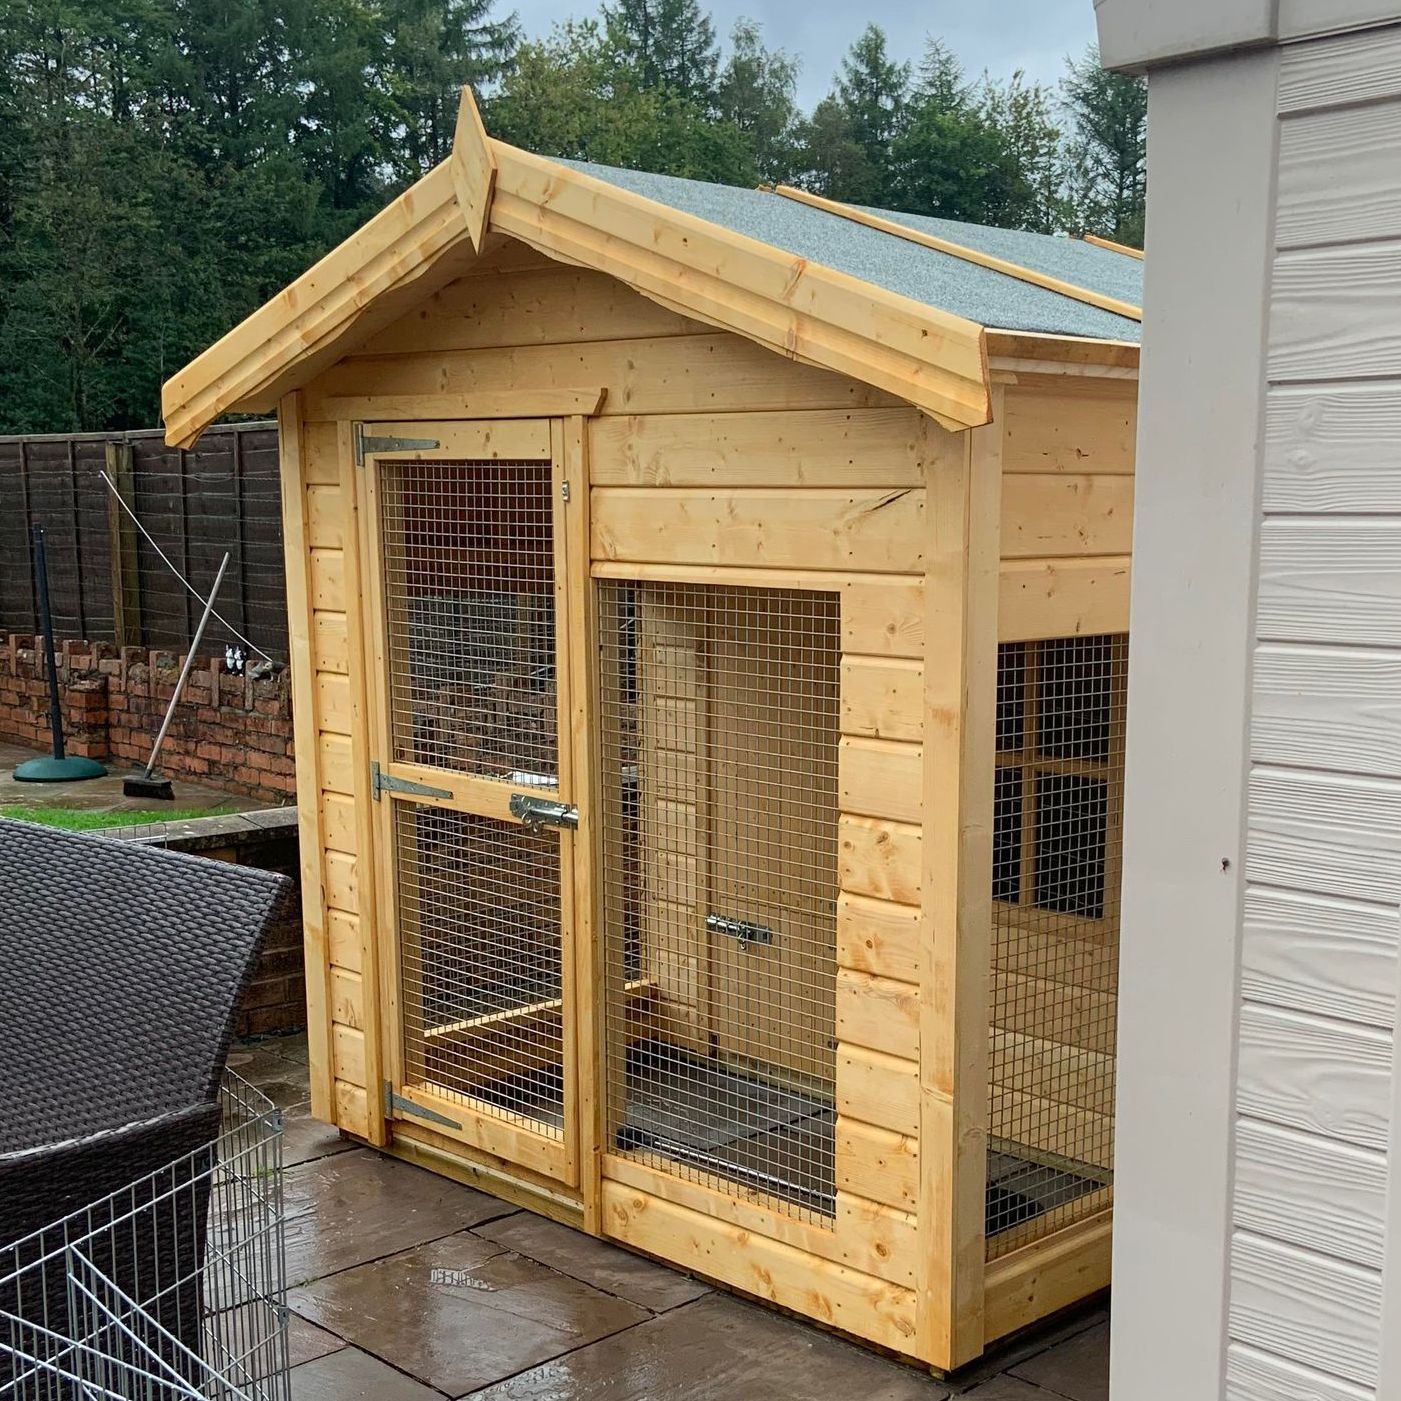 7' x 6' Made to measure rabbit hutch that you can get into easier. 